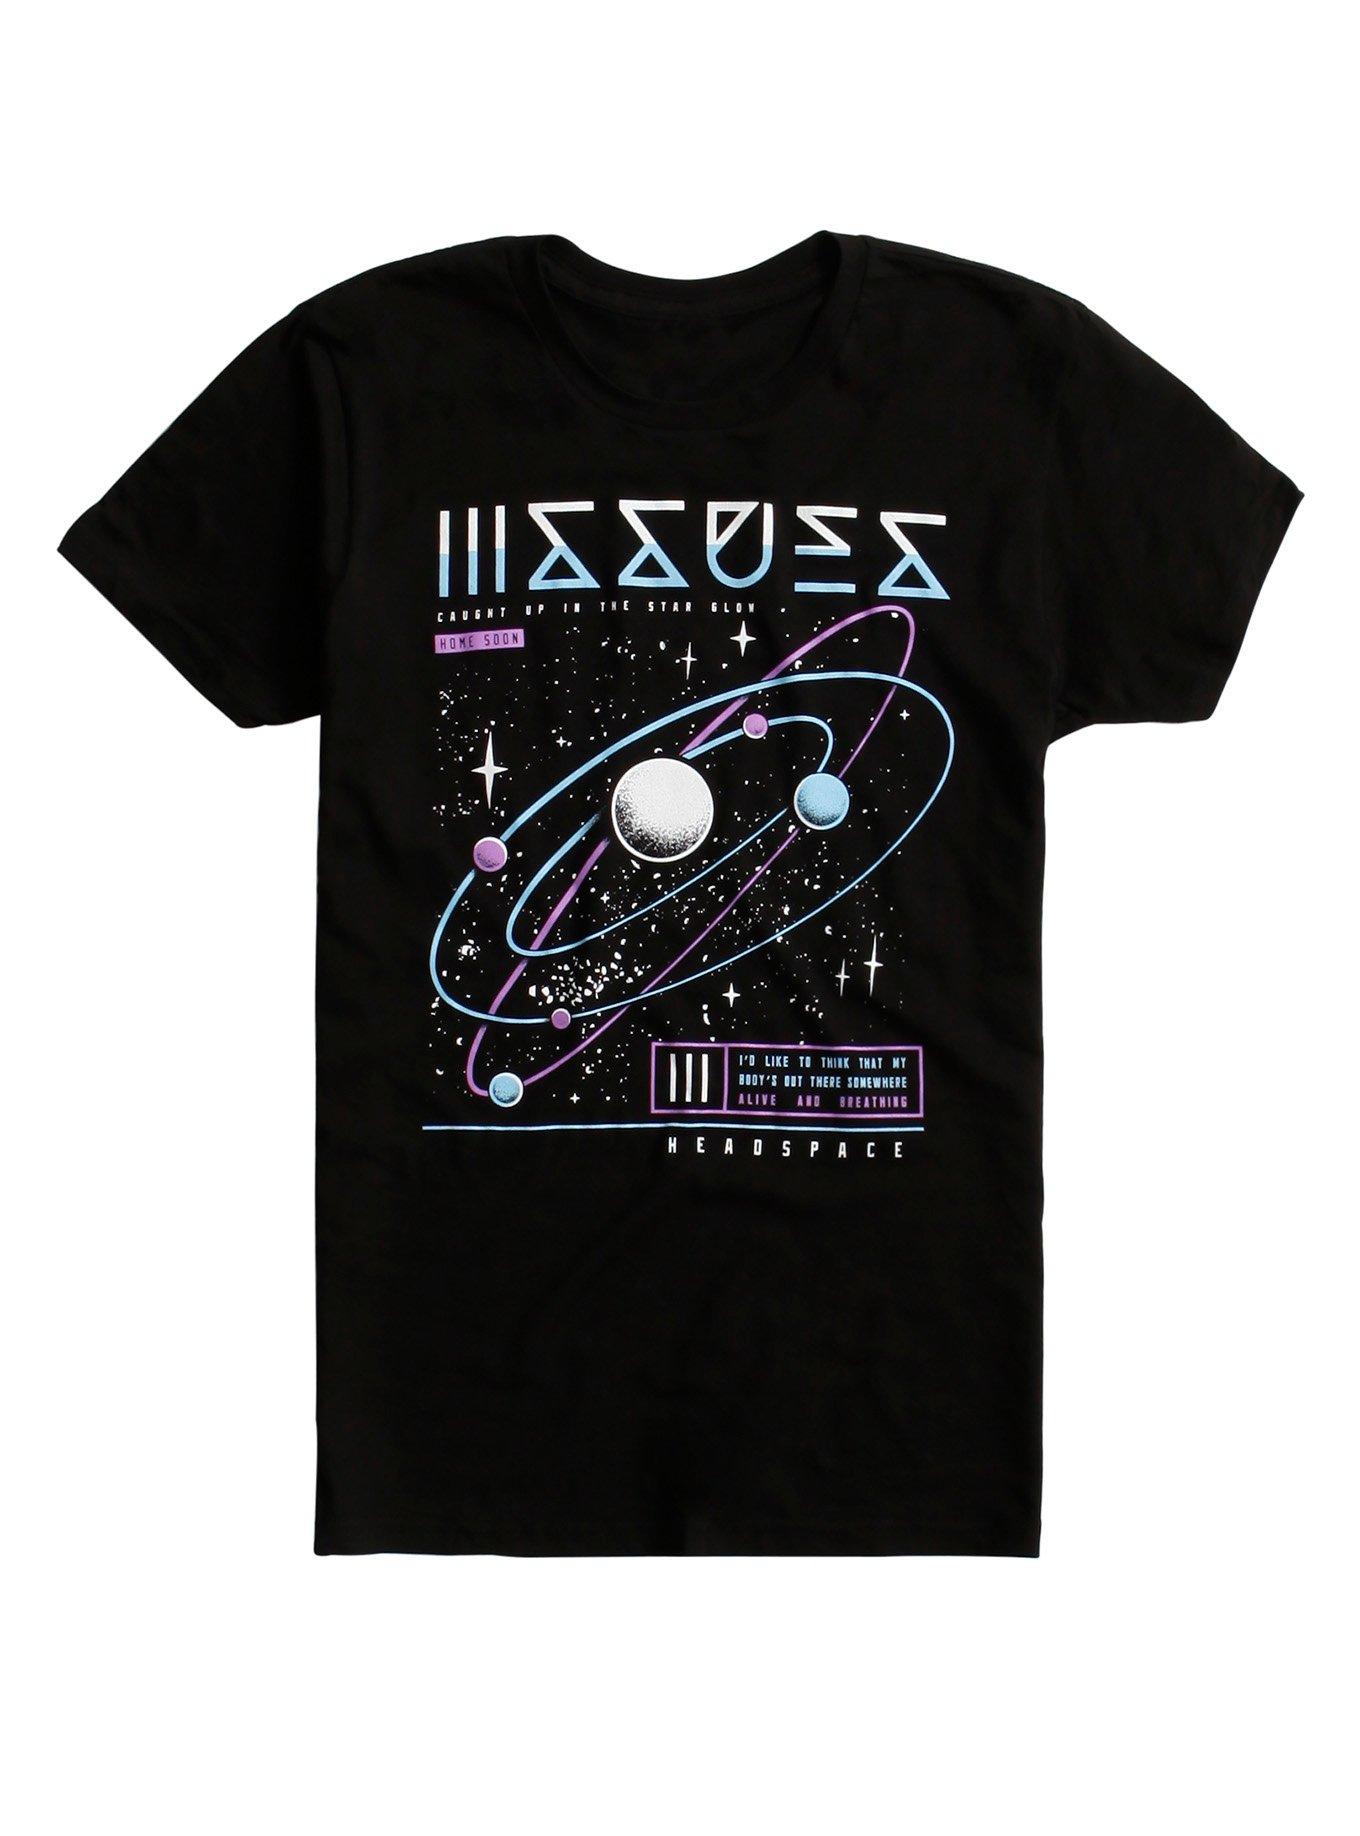 Issues Headspace T-Shirt | Hot Topic